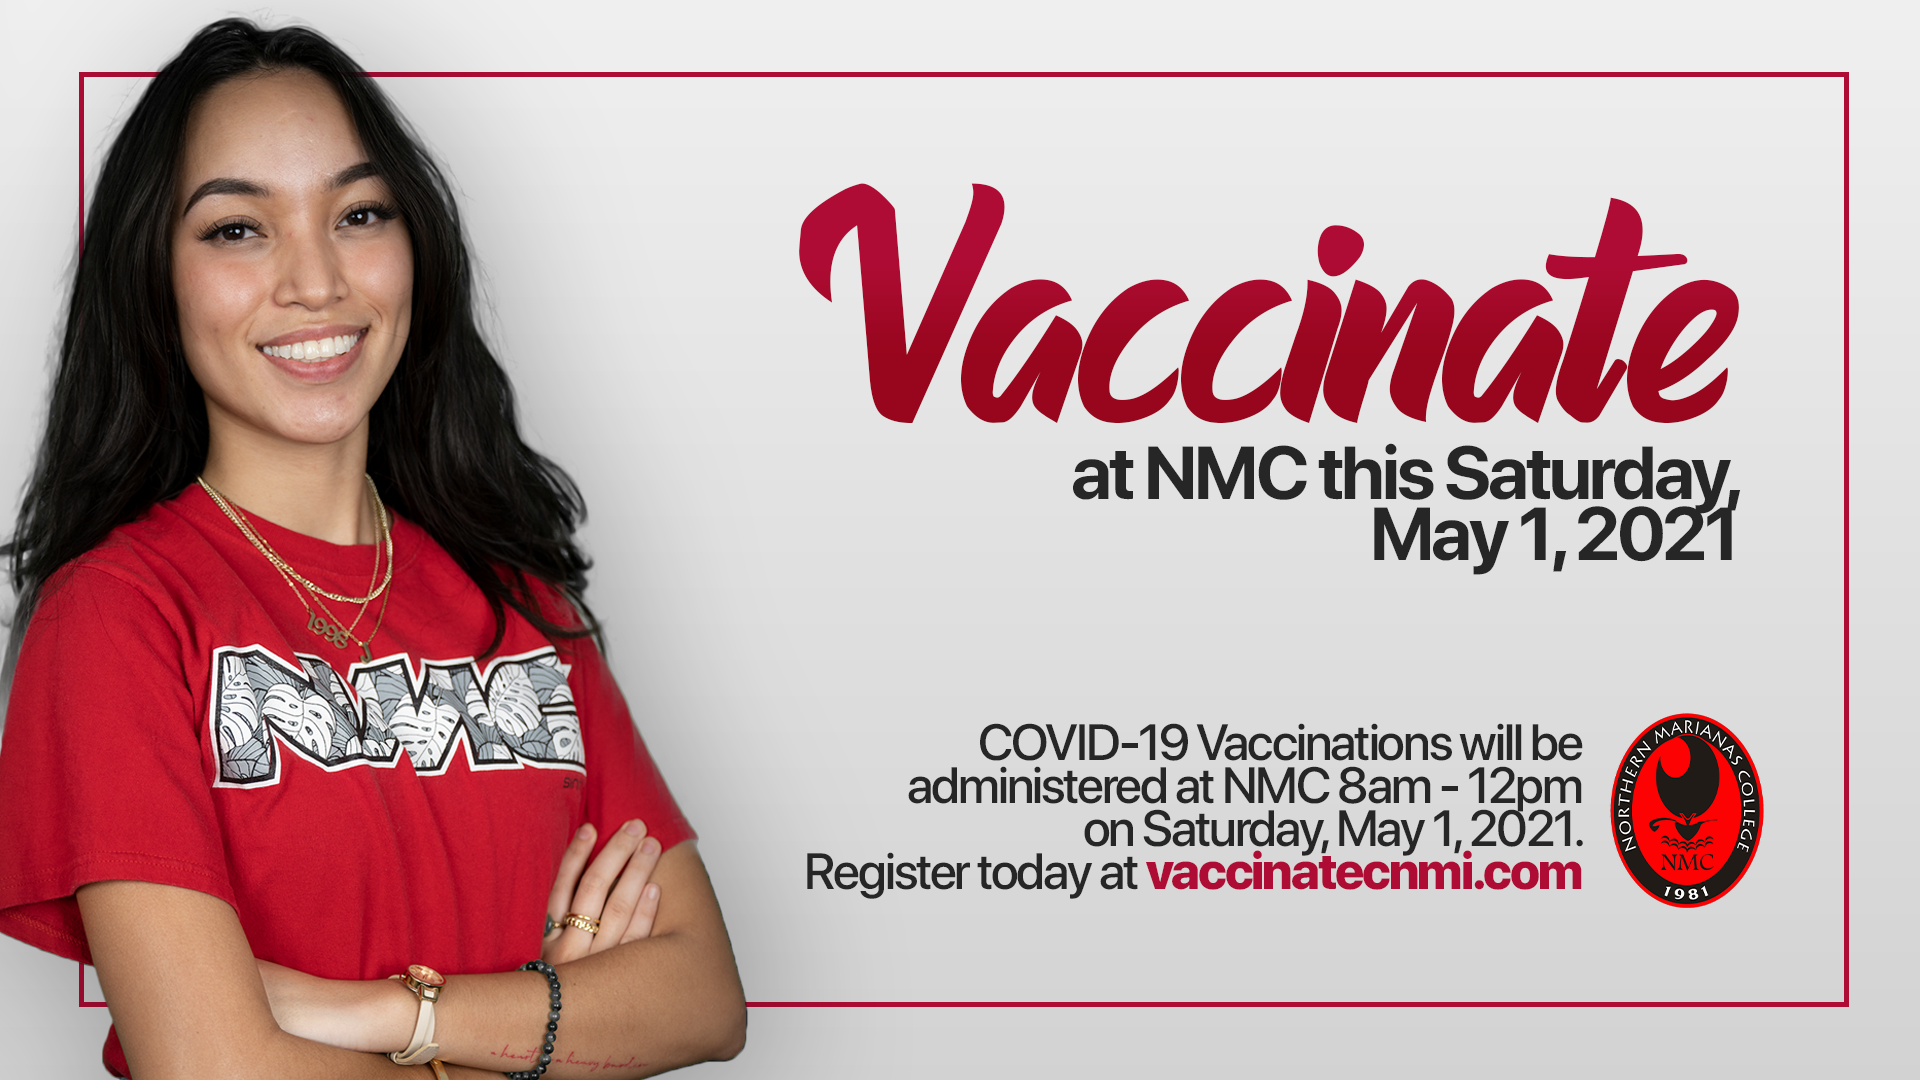 Vaccinate at NMC Poster